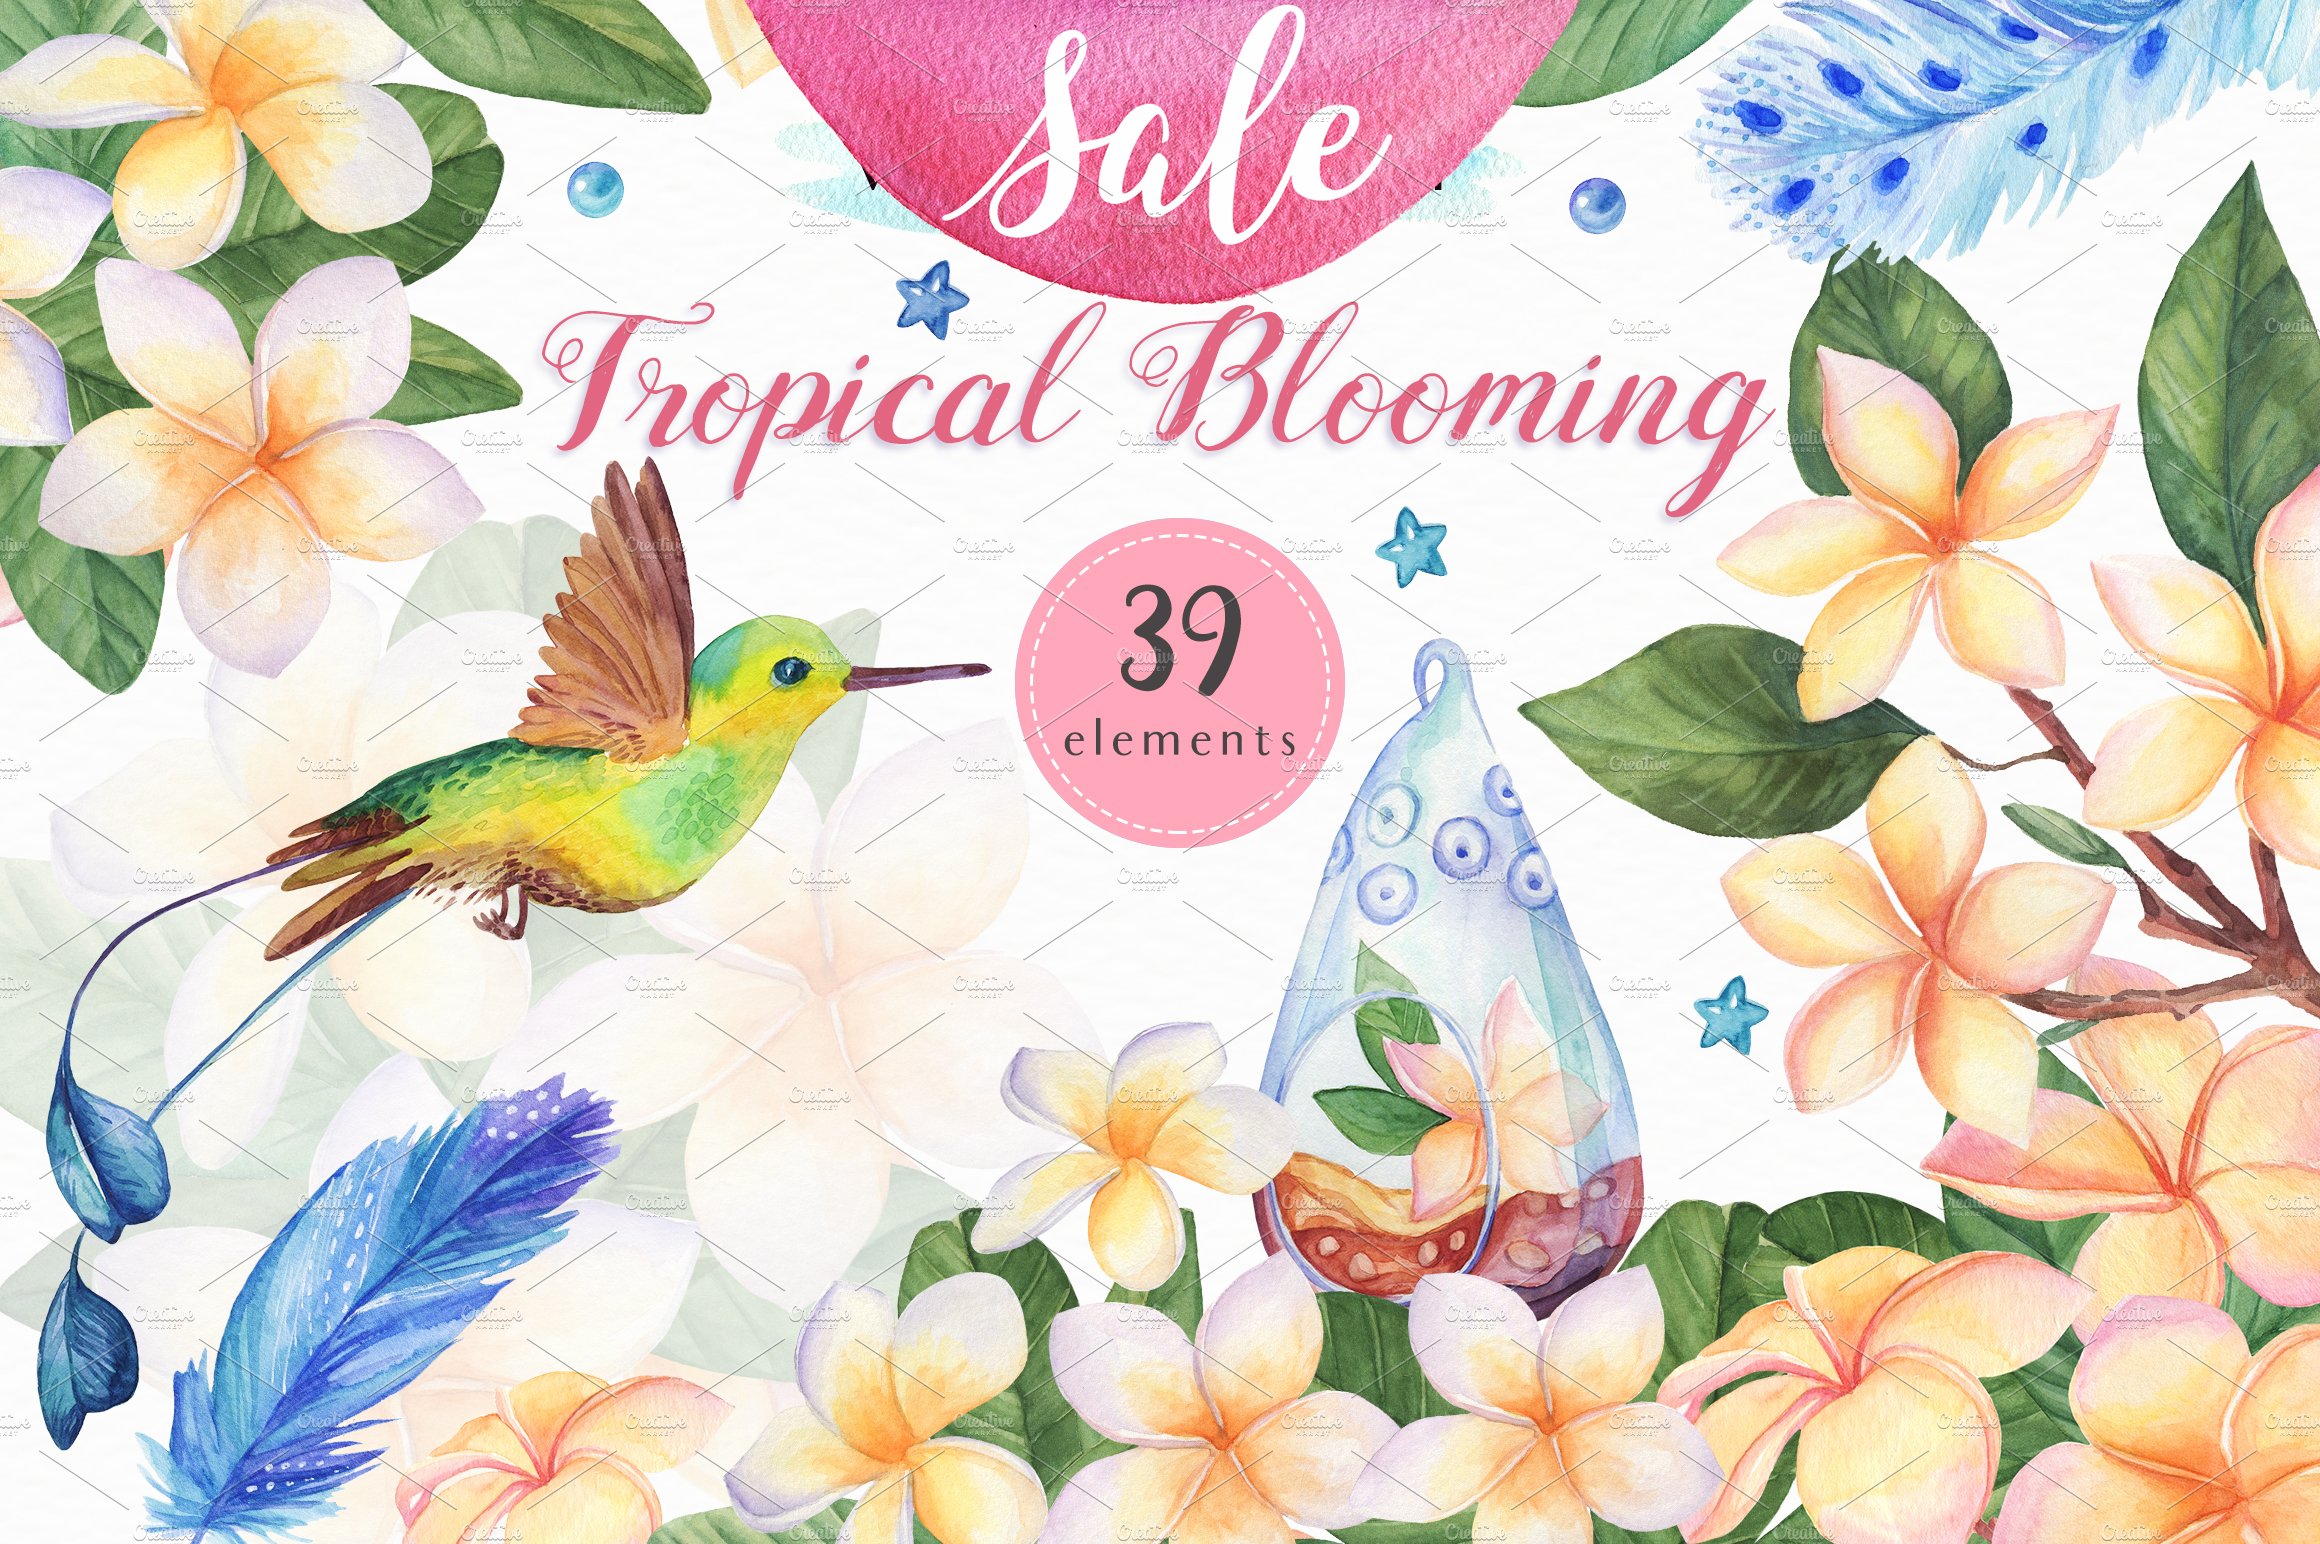 SALE! Tropical Blooming cover image.